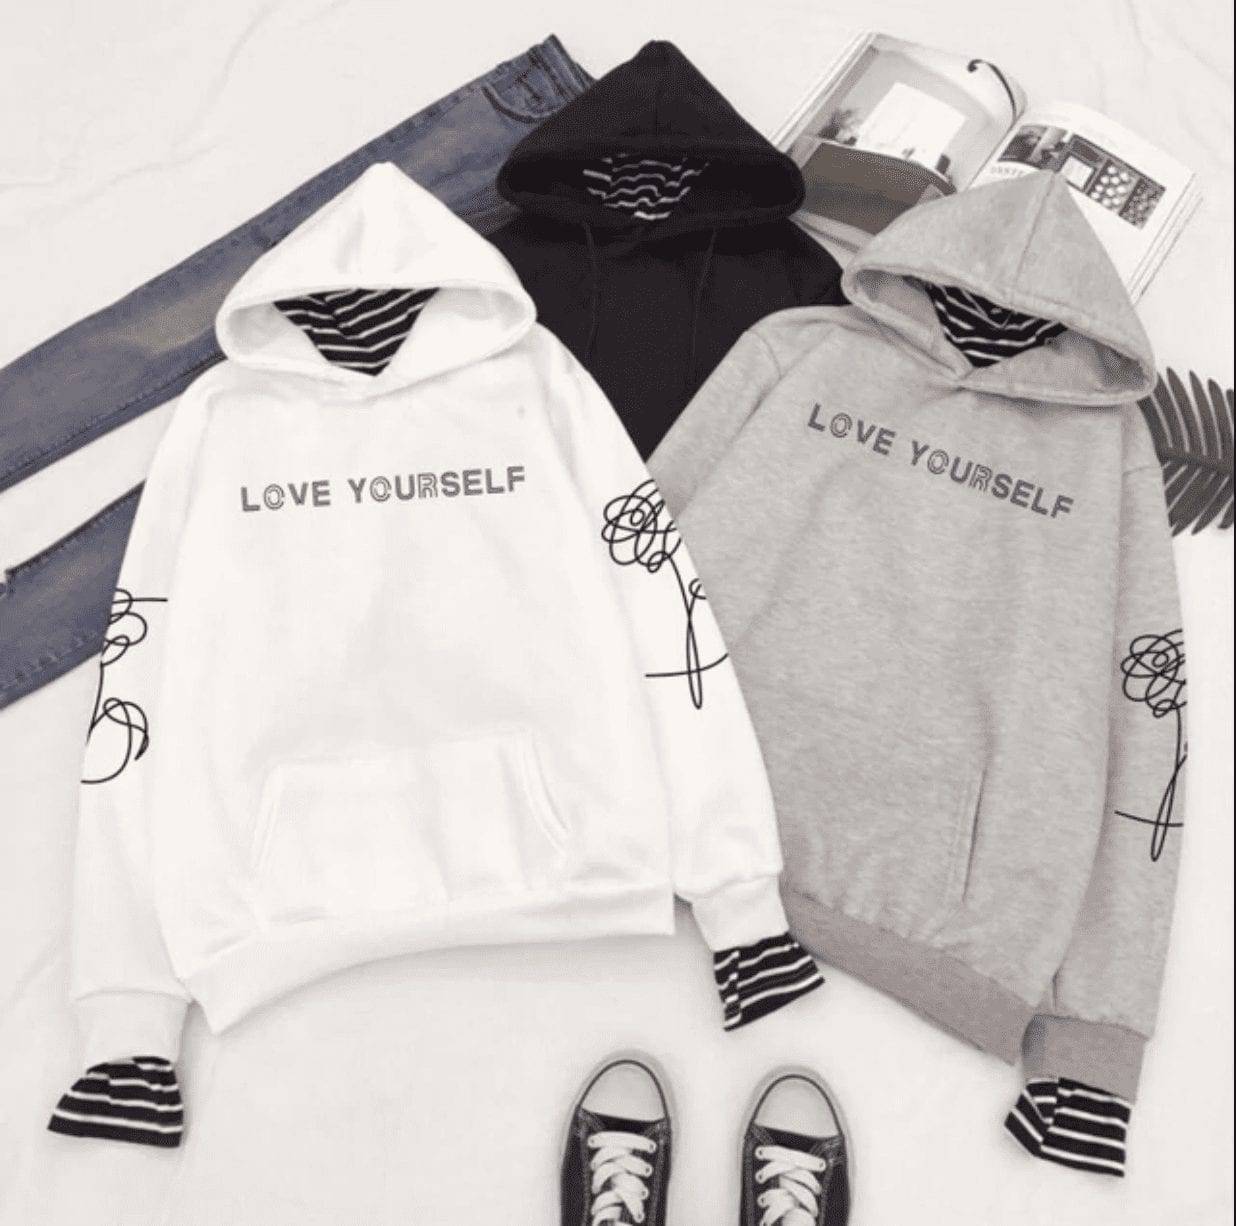 BTS sweater - love yourself edition